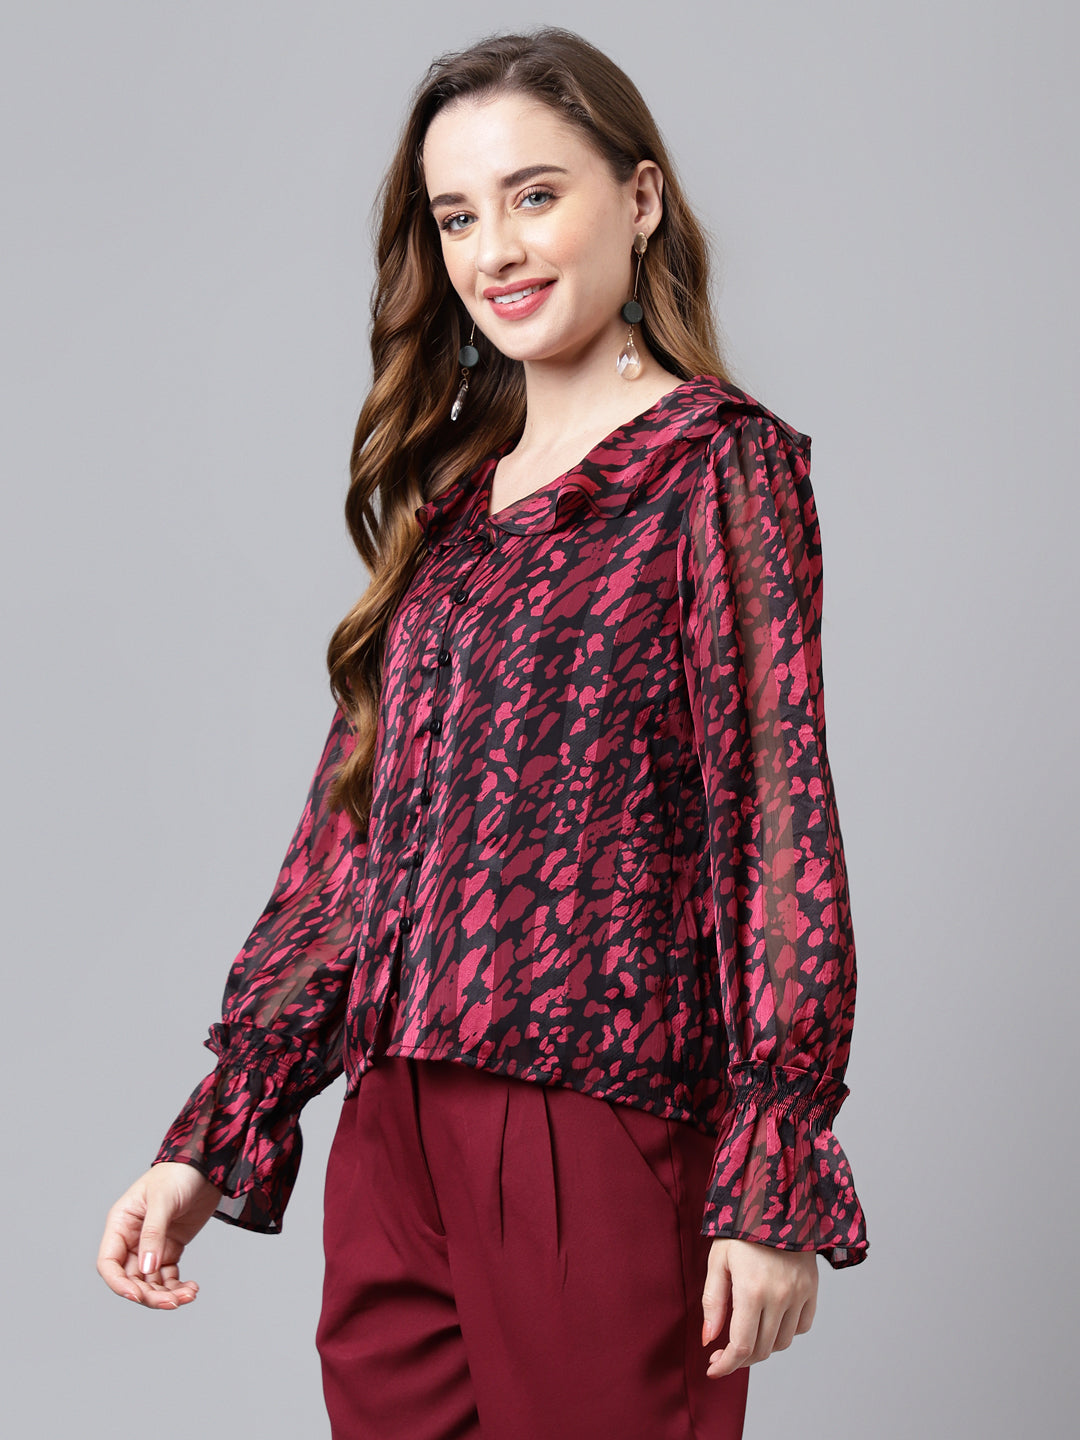 Maroon Full Sleeve Collar Neck Printed Women Blouse Top for Casual